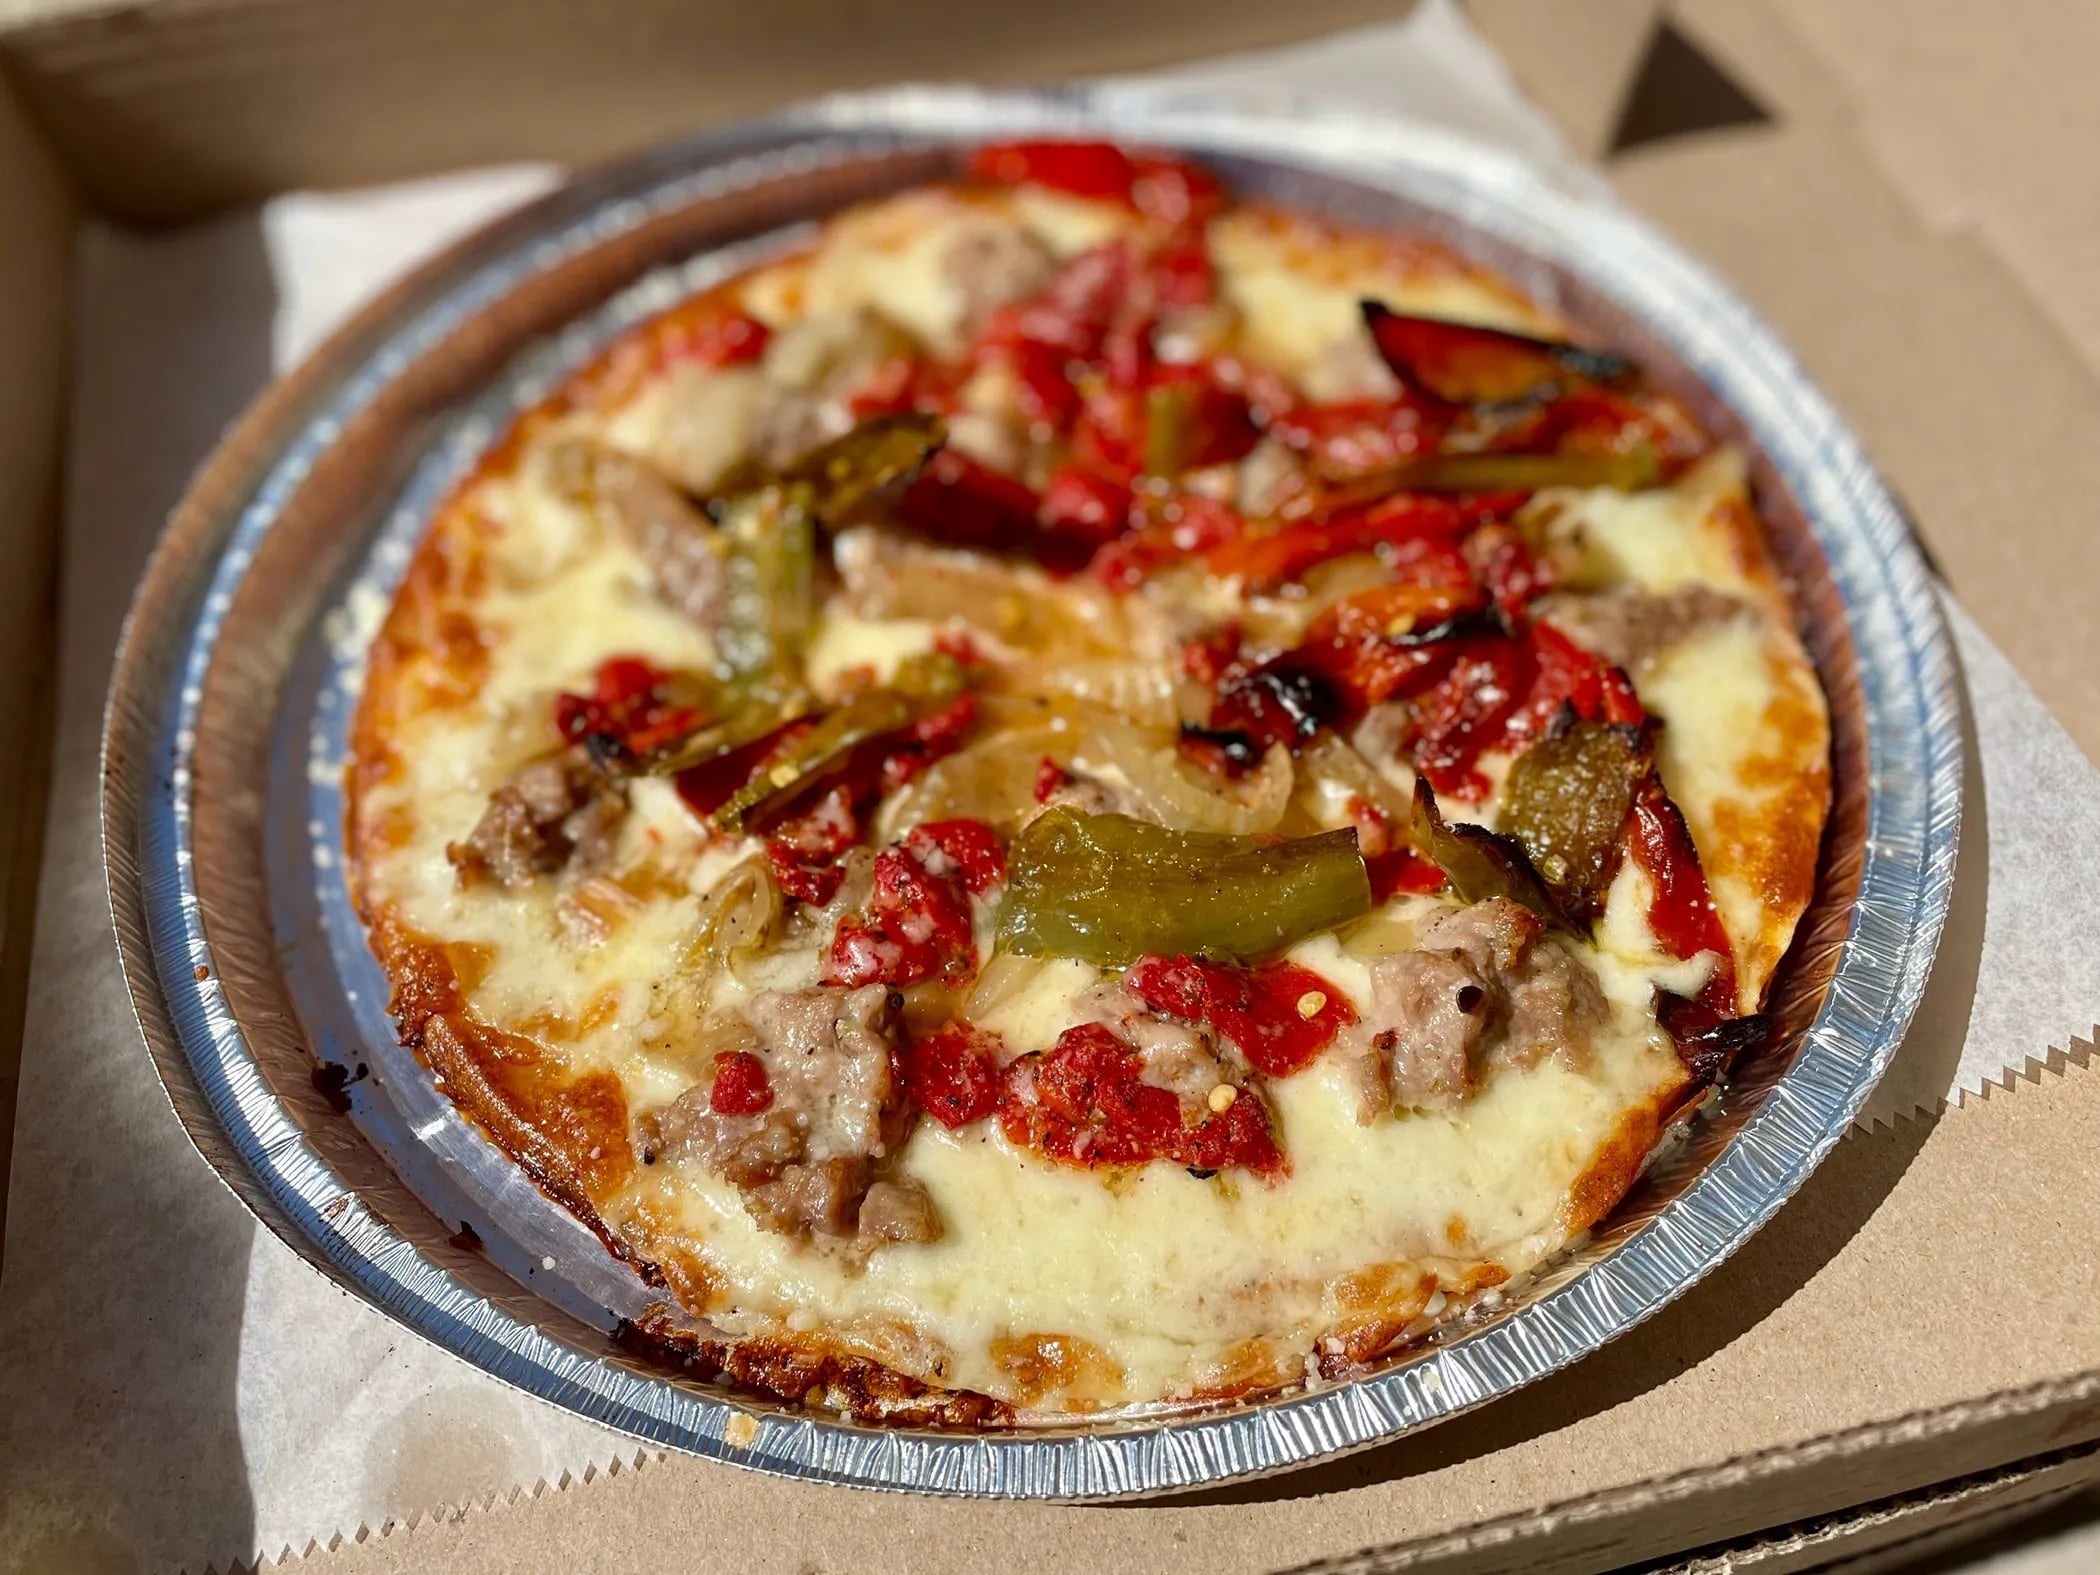 A sausage and pepper pizza on a gluten-free crust from SliCE in South Philadelphia.